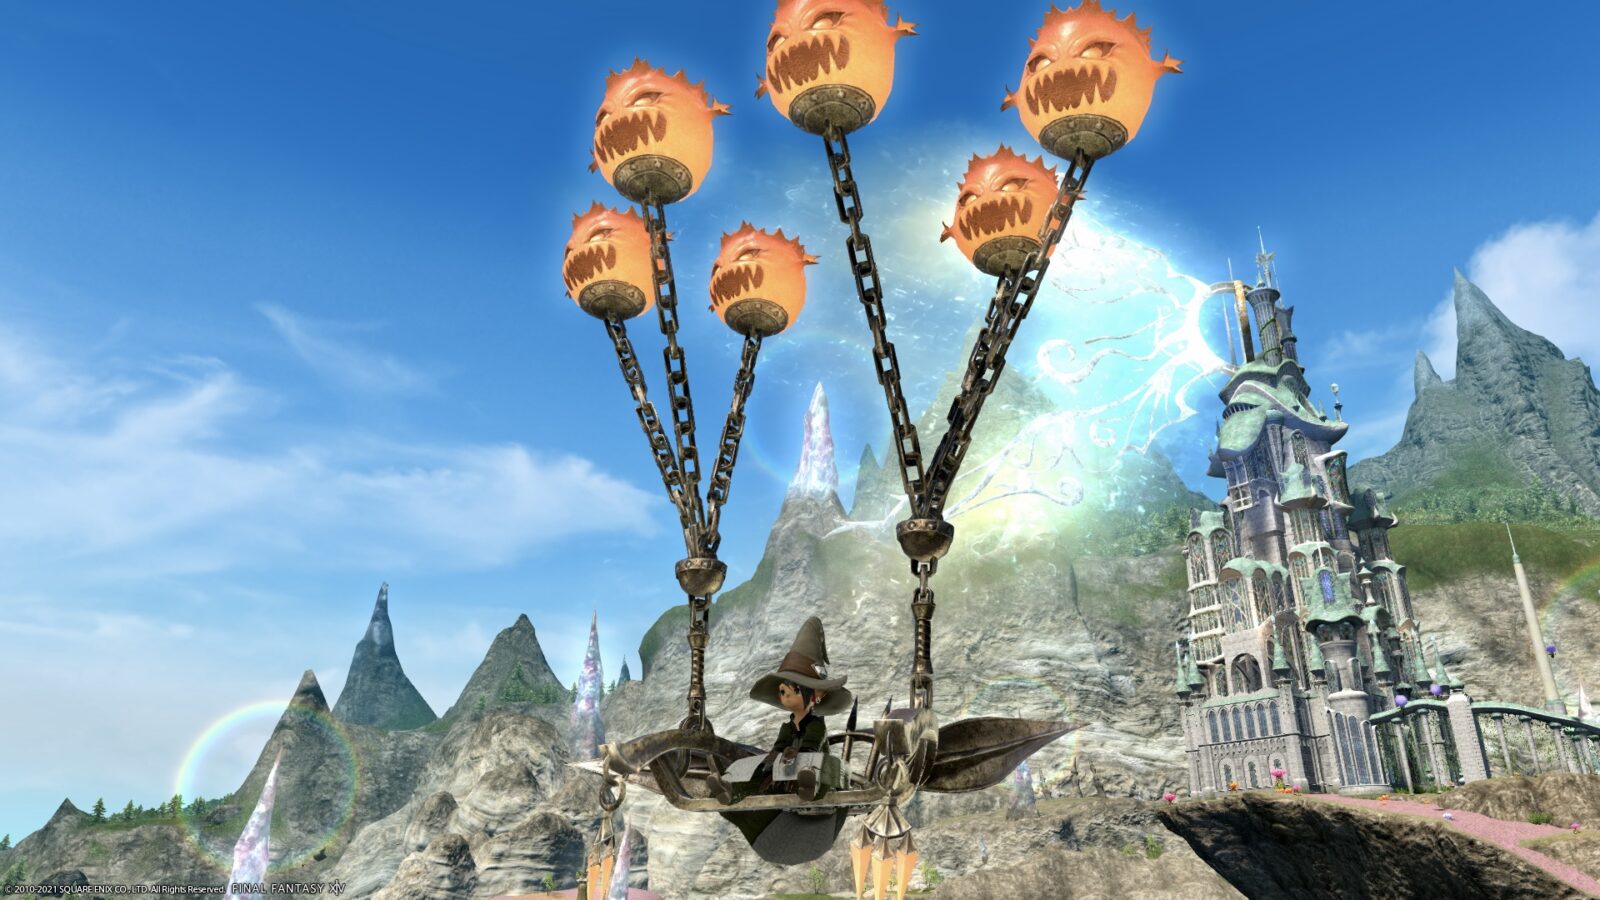 Cute Bomb Balloon Flying Bench Kobold Quest Mount “Bomb Palanquin 